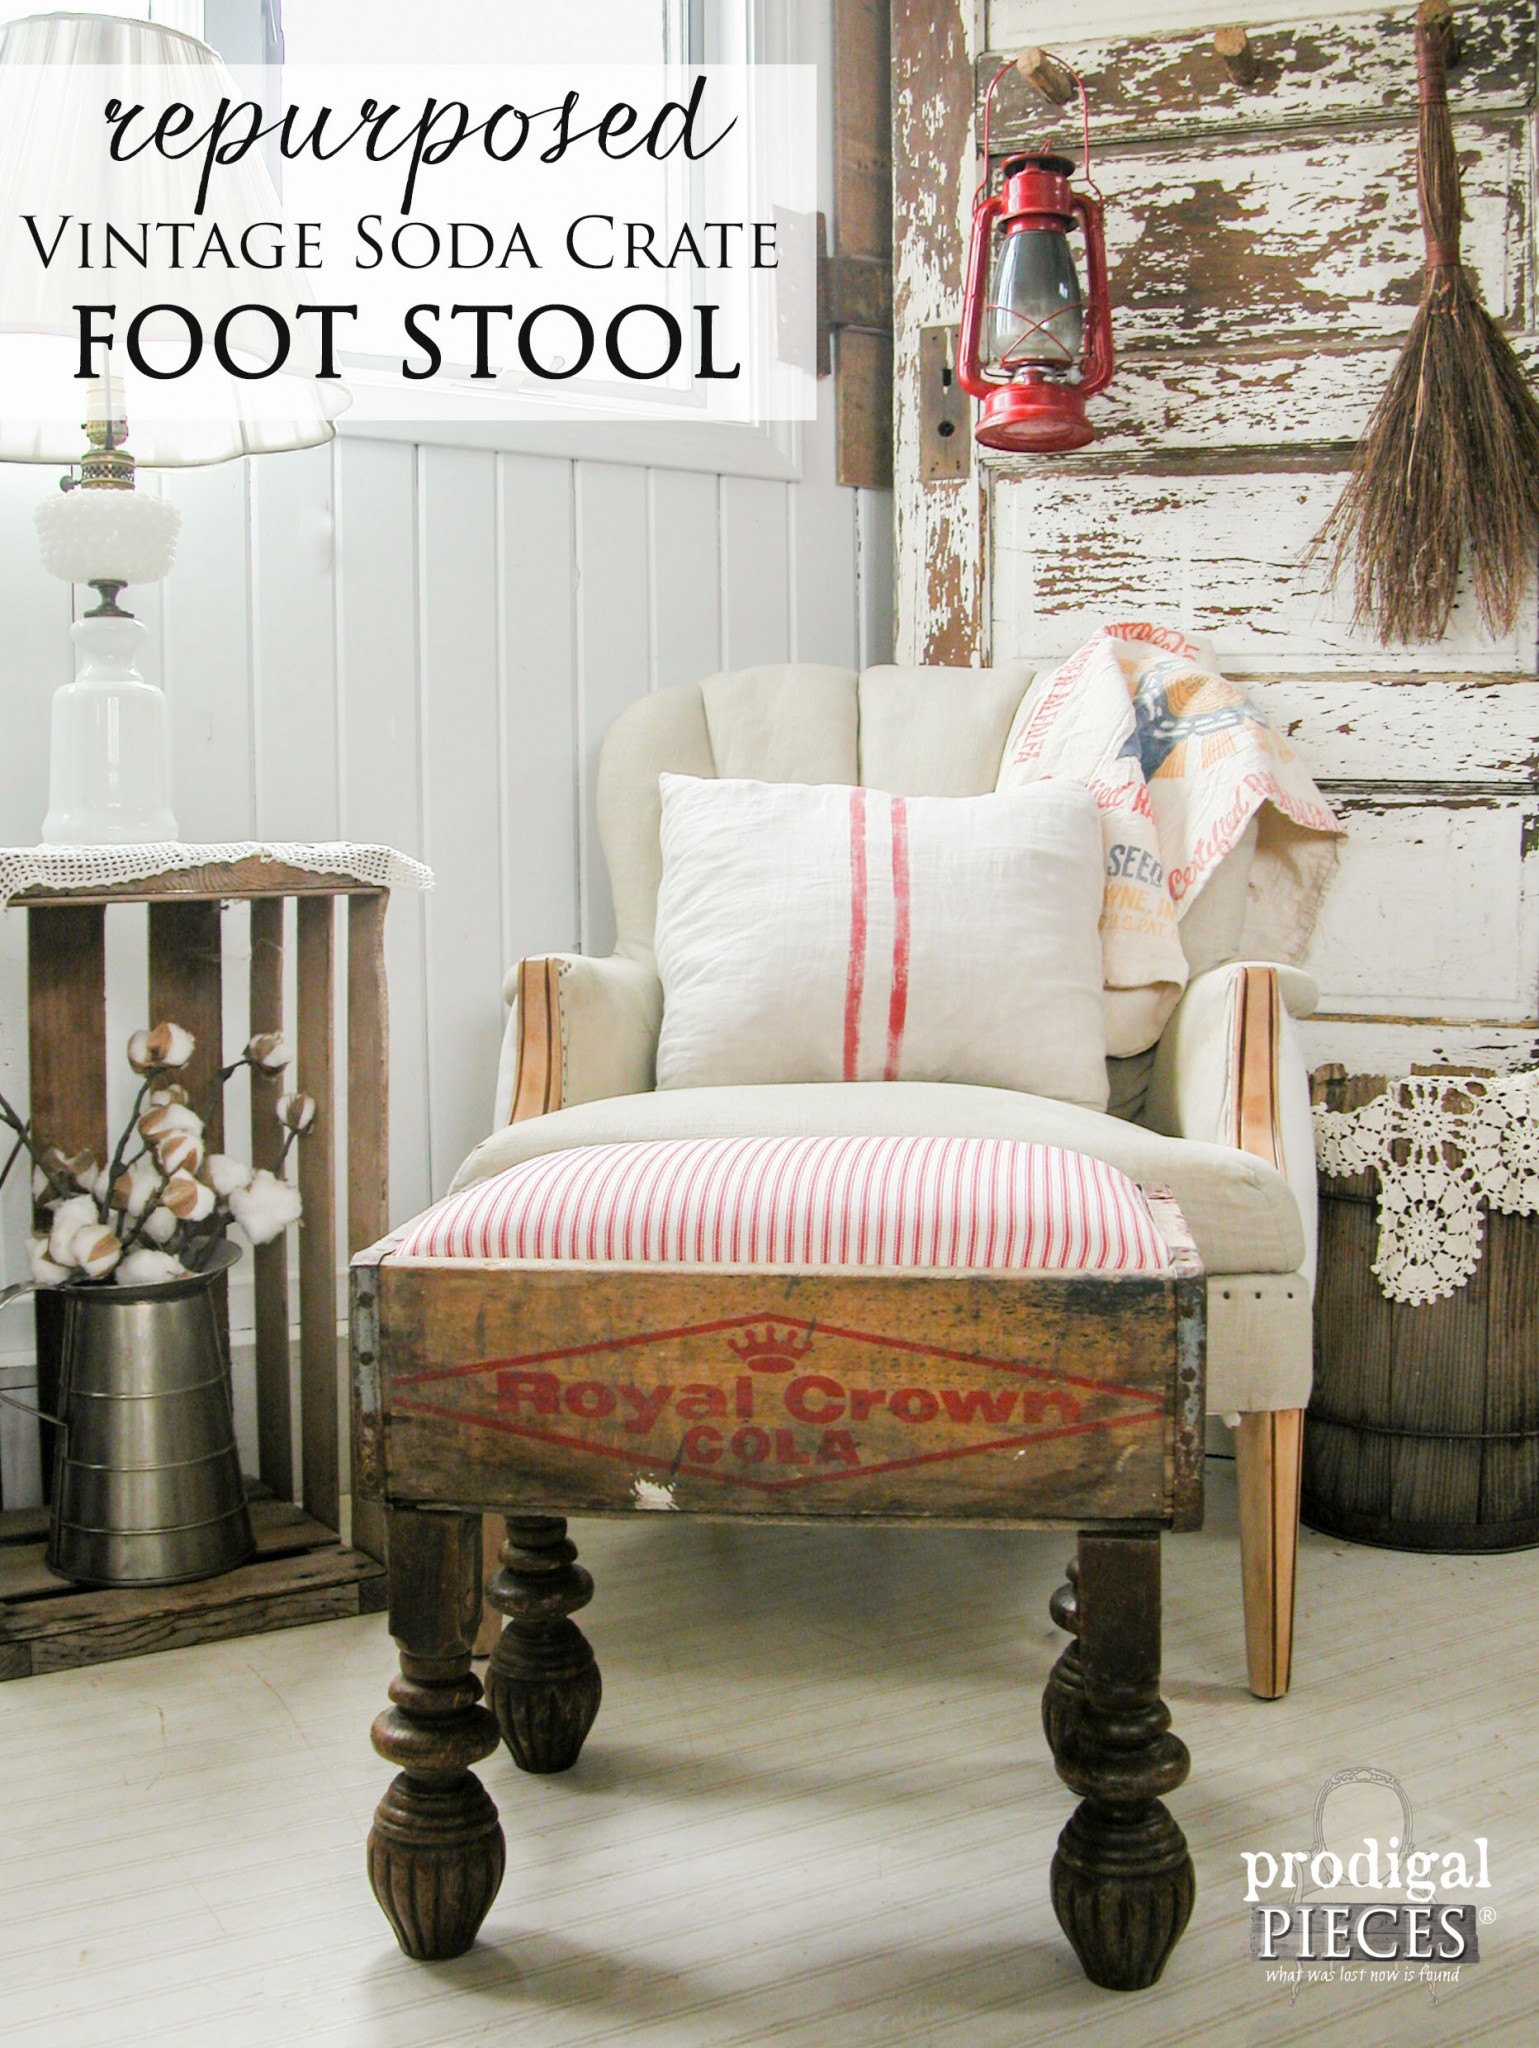 Vintage Soda Crate Repurposed into Foot Stool by Prodigal Pieces | prodigalpieces.com